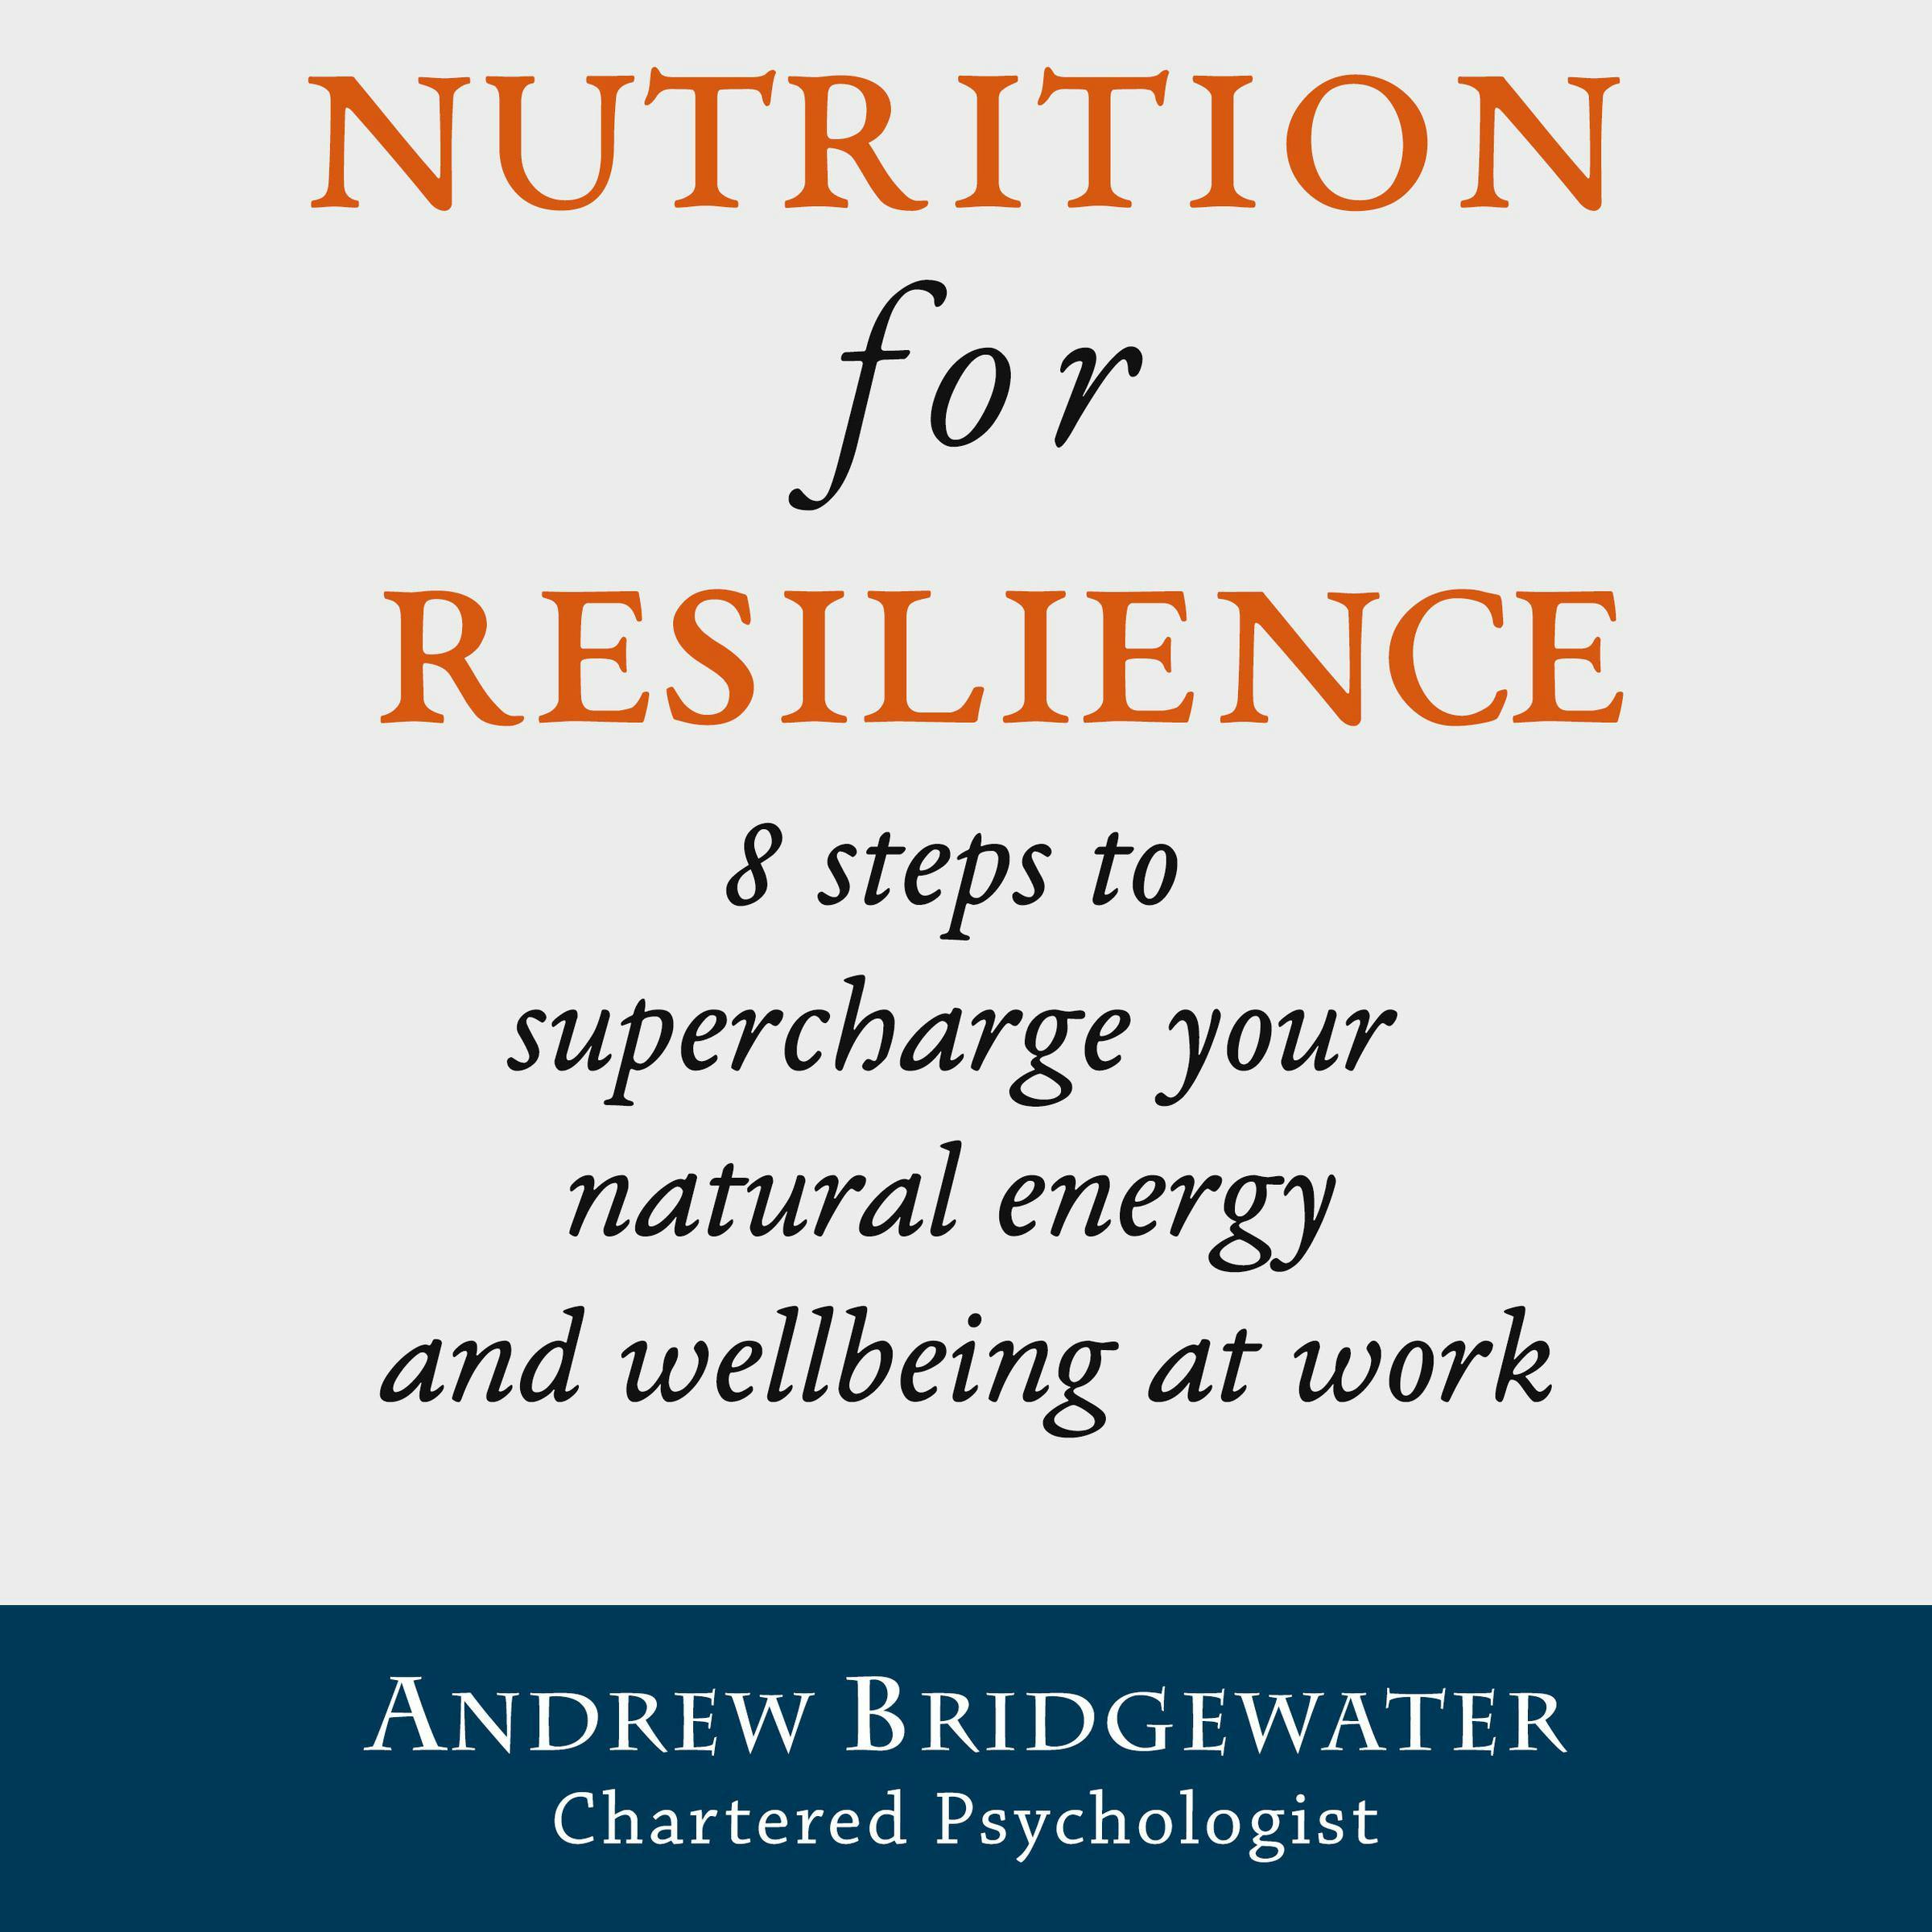 Nutrition for Resilience: 8 steps to supercharge your natural energy & wellbeing at work - Chartered Psychologist, Andrew Bridgewater